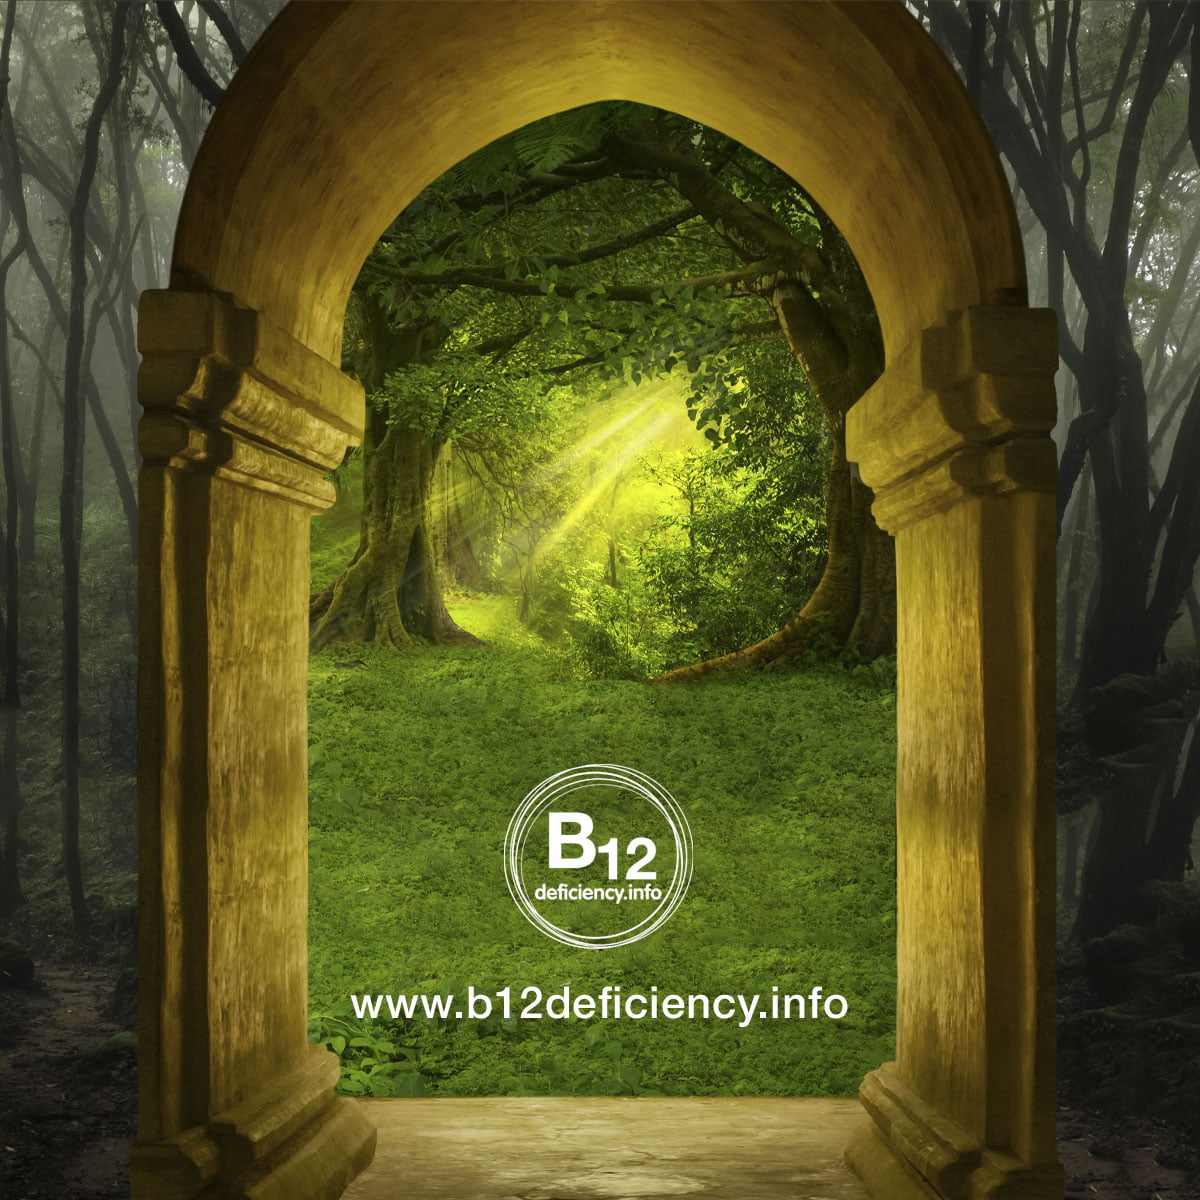 B12 deficiency, the fantasy & the reality